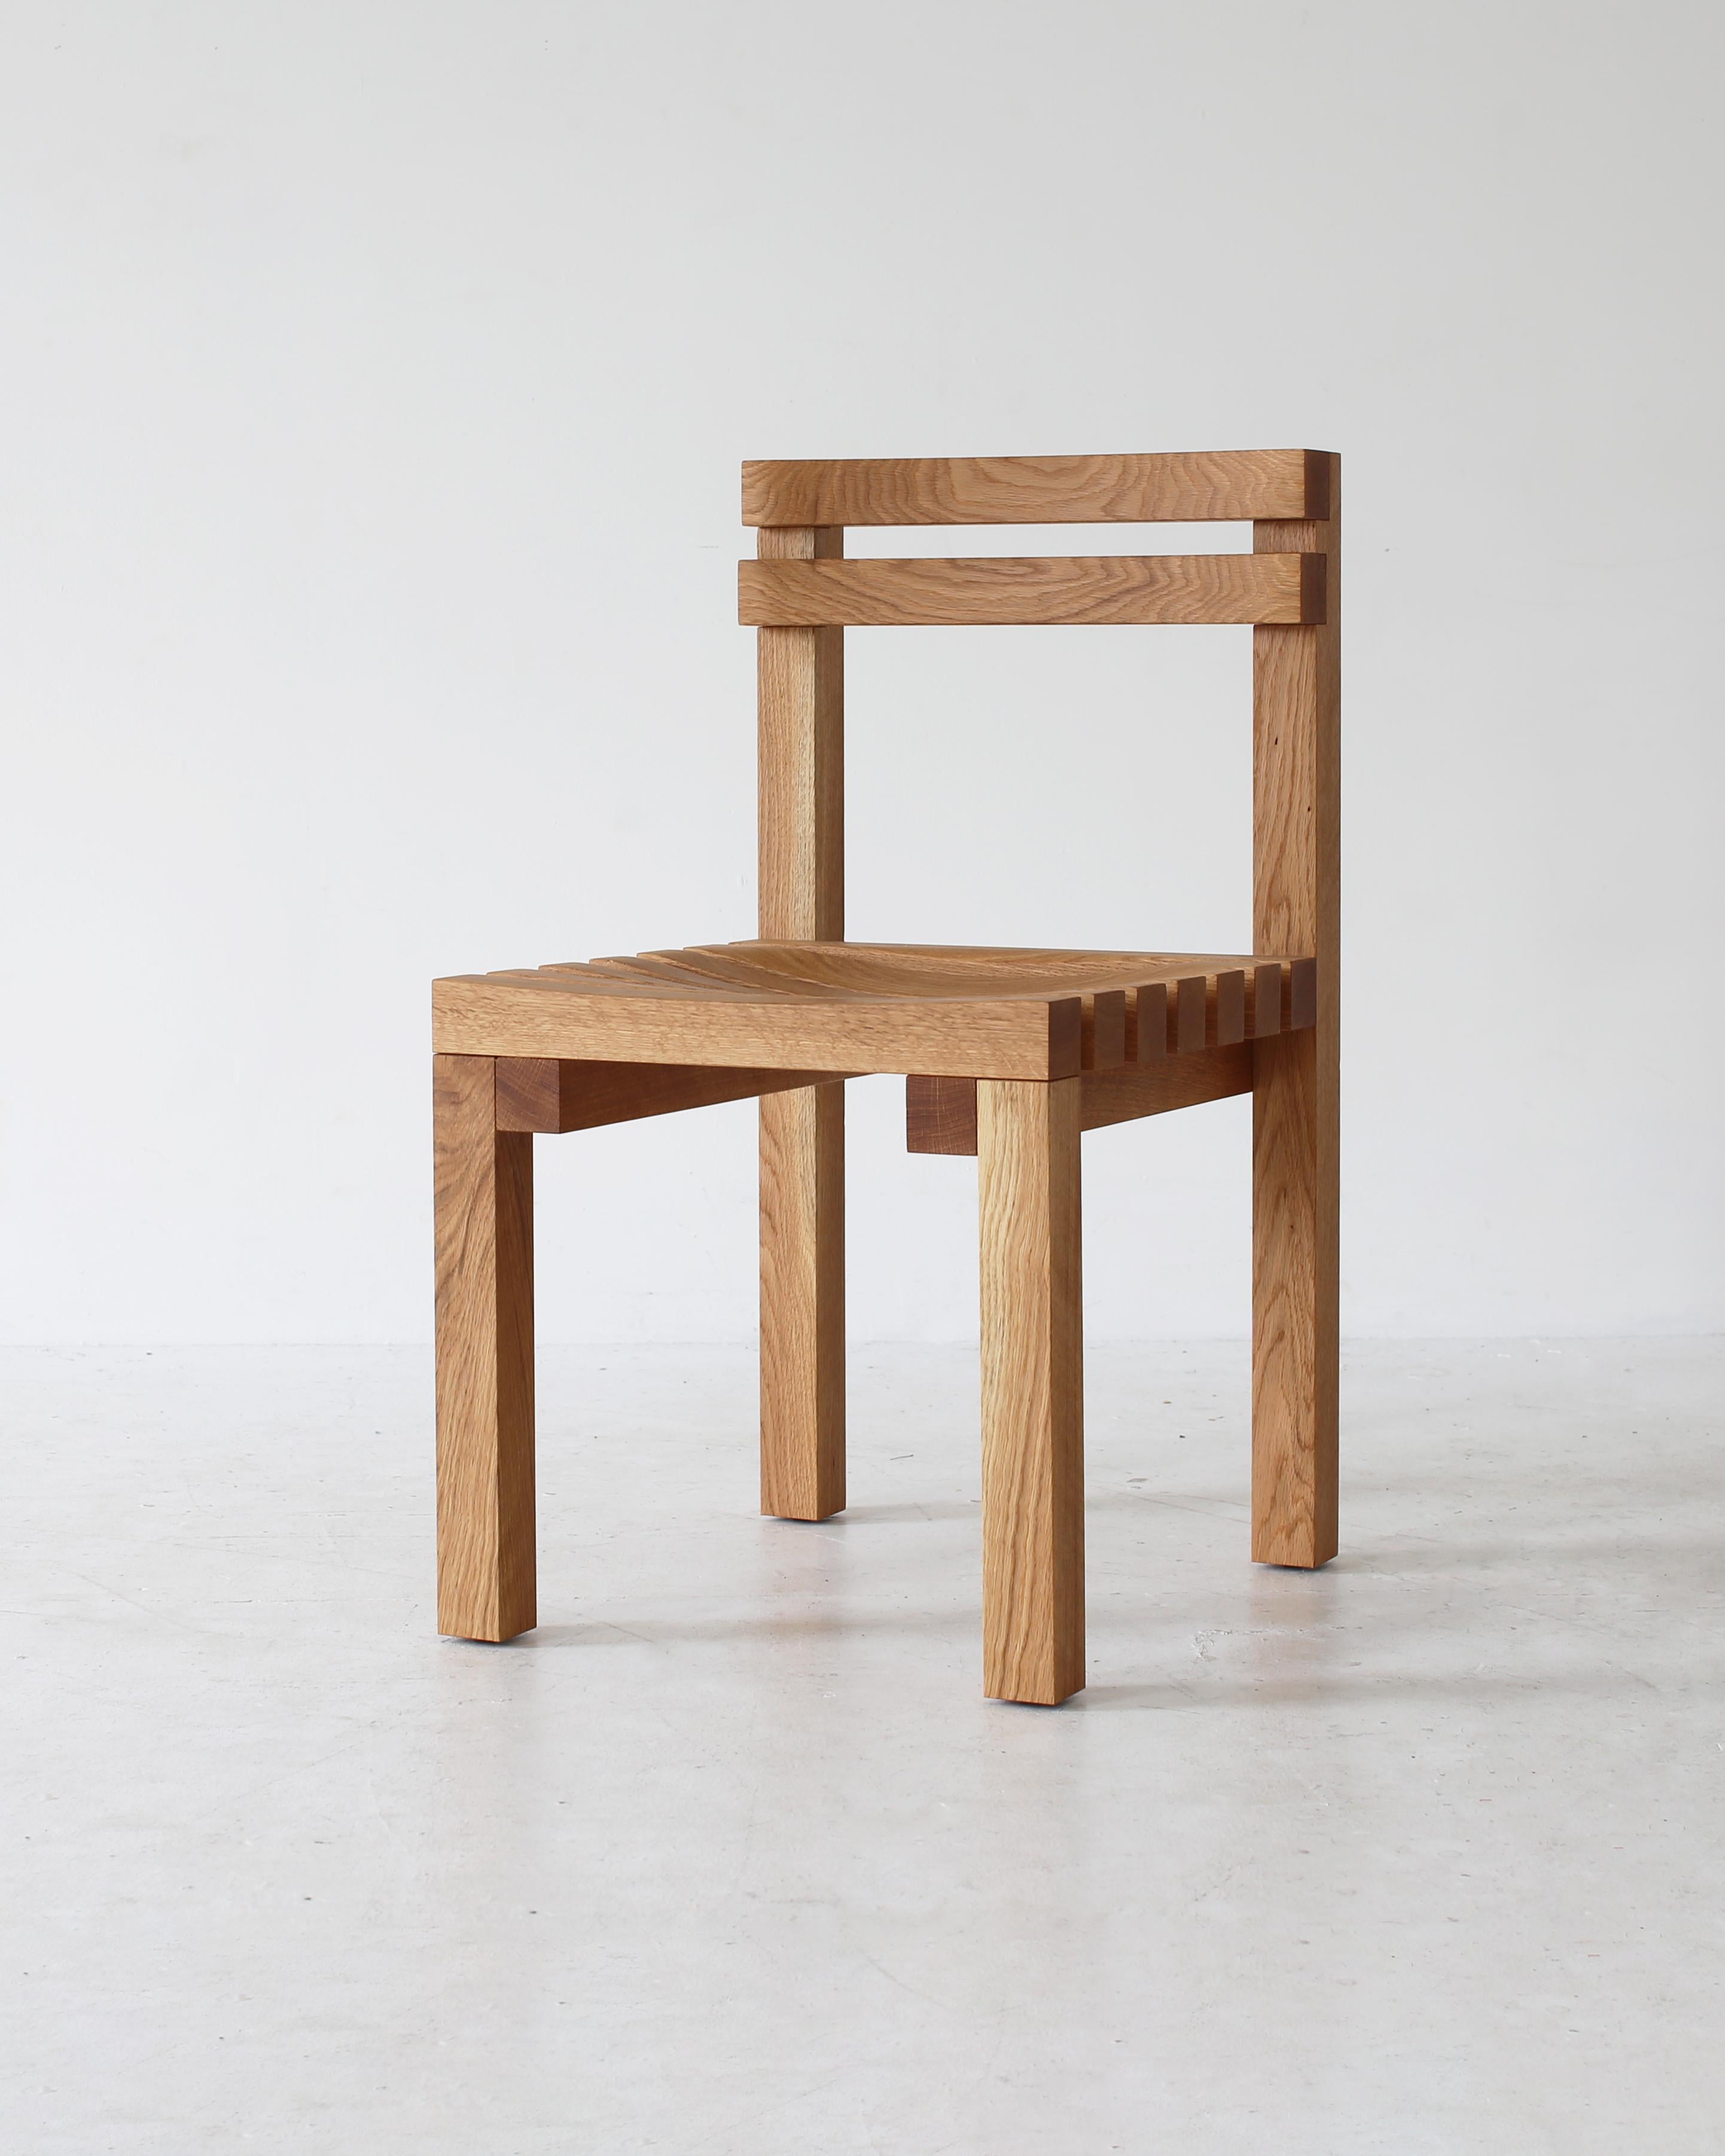 2x2 Chair is made entirely of 2-inch by 2-inch wood members, carved on a CNC mill, and assembled into a minimal, yet comfortable chair. Available in oak, maple, or sapele with a hand-rubbed oil finish.